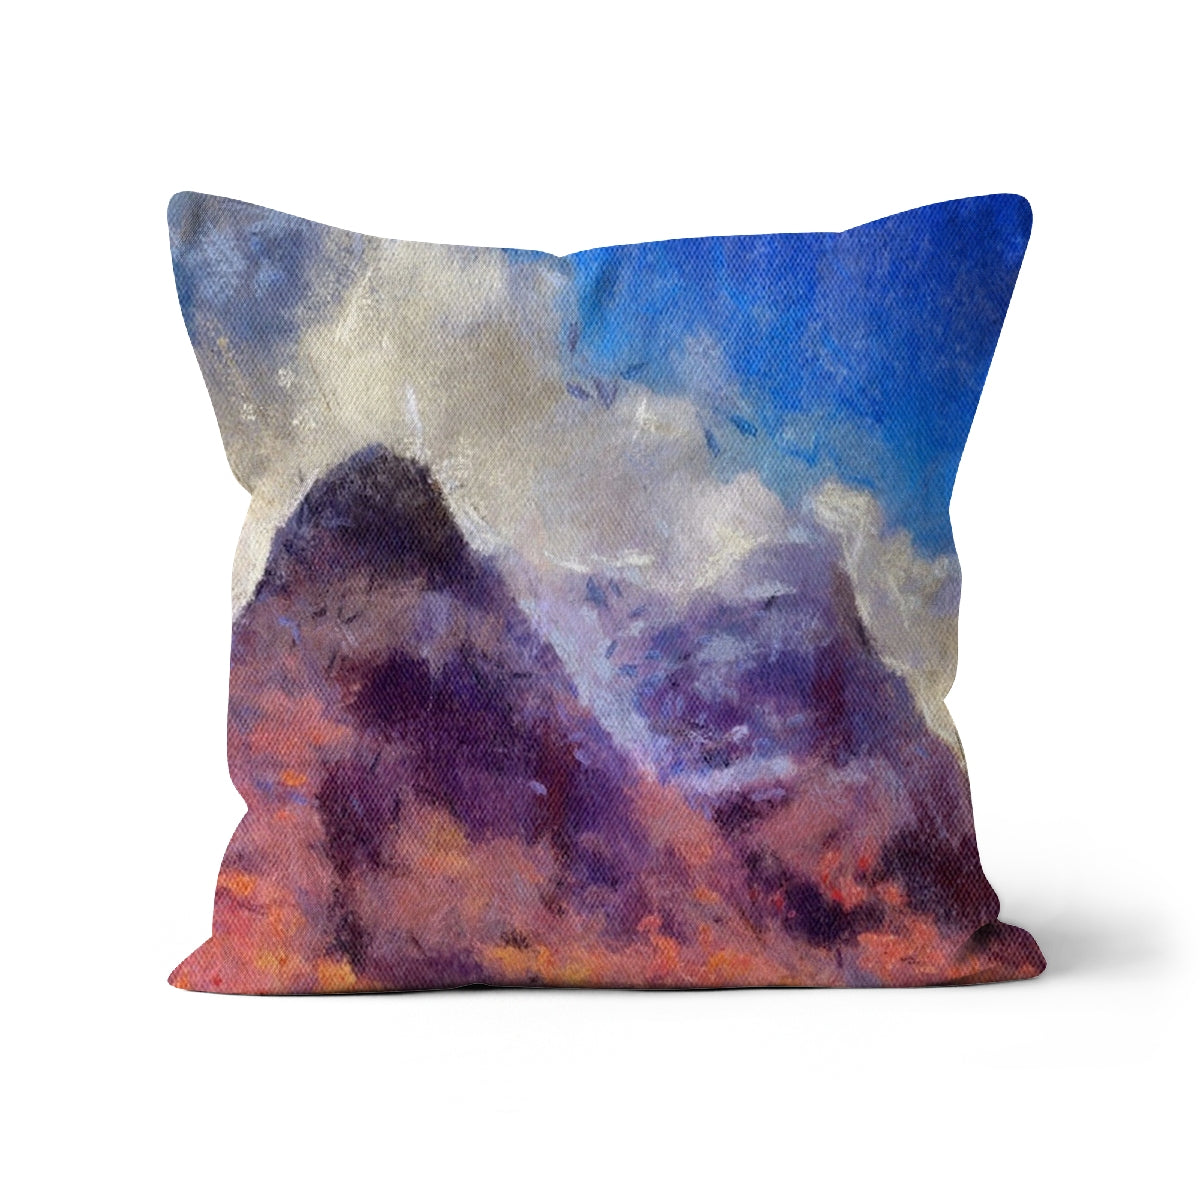 Glencoe Art Gifts Cushion-Cushions-Glencoe Art Gallery-Faux Suede-12"x12"-Paintings, Prints, Homeware, Art Gifts From Scotland By Scottish Artist Kevin Hunter